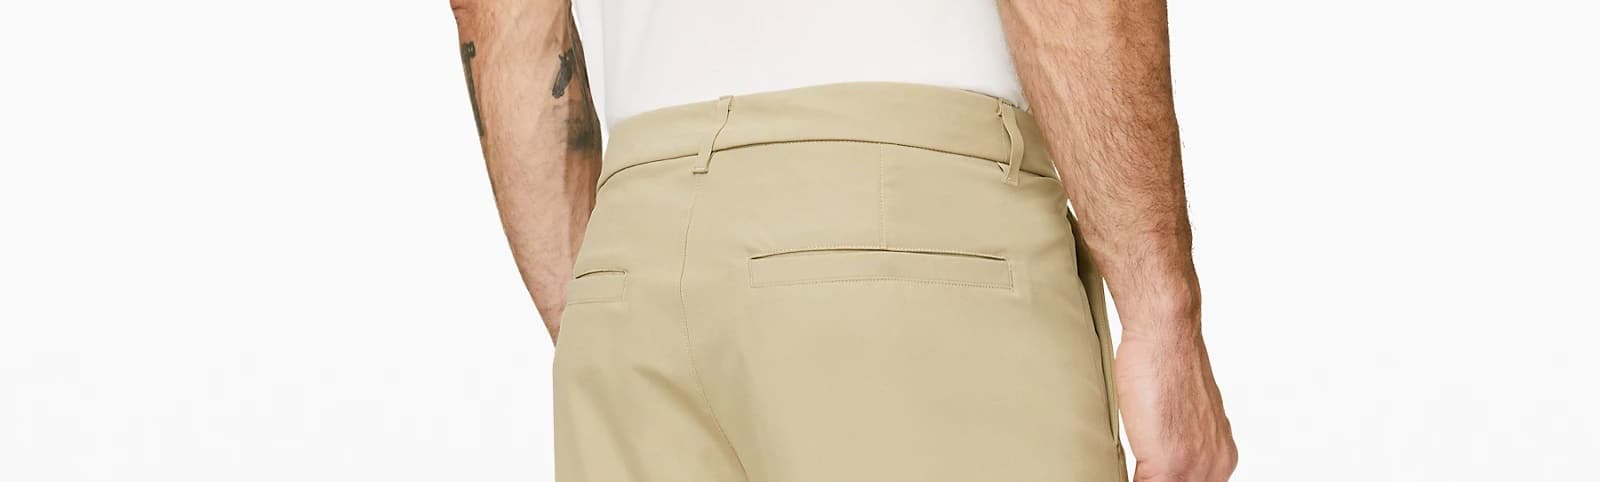 ABC Pant Review - God's gift to men? Or expensive marketing gimmick? 11